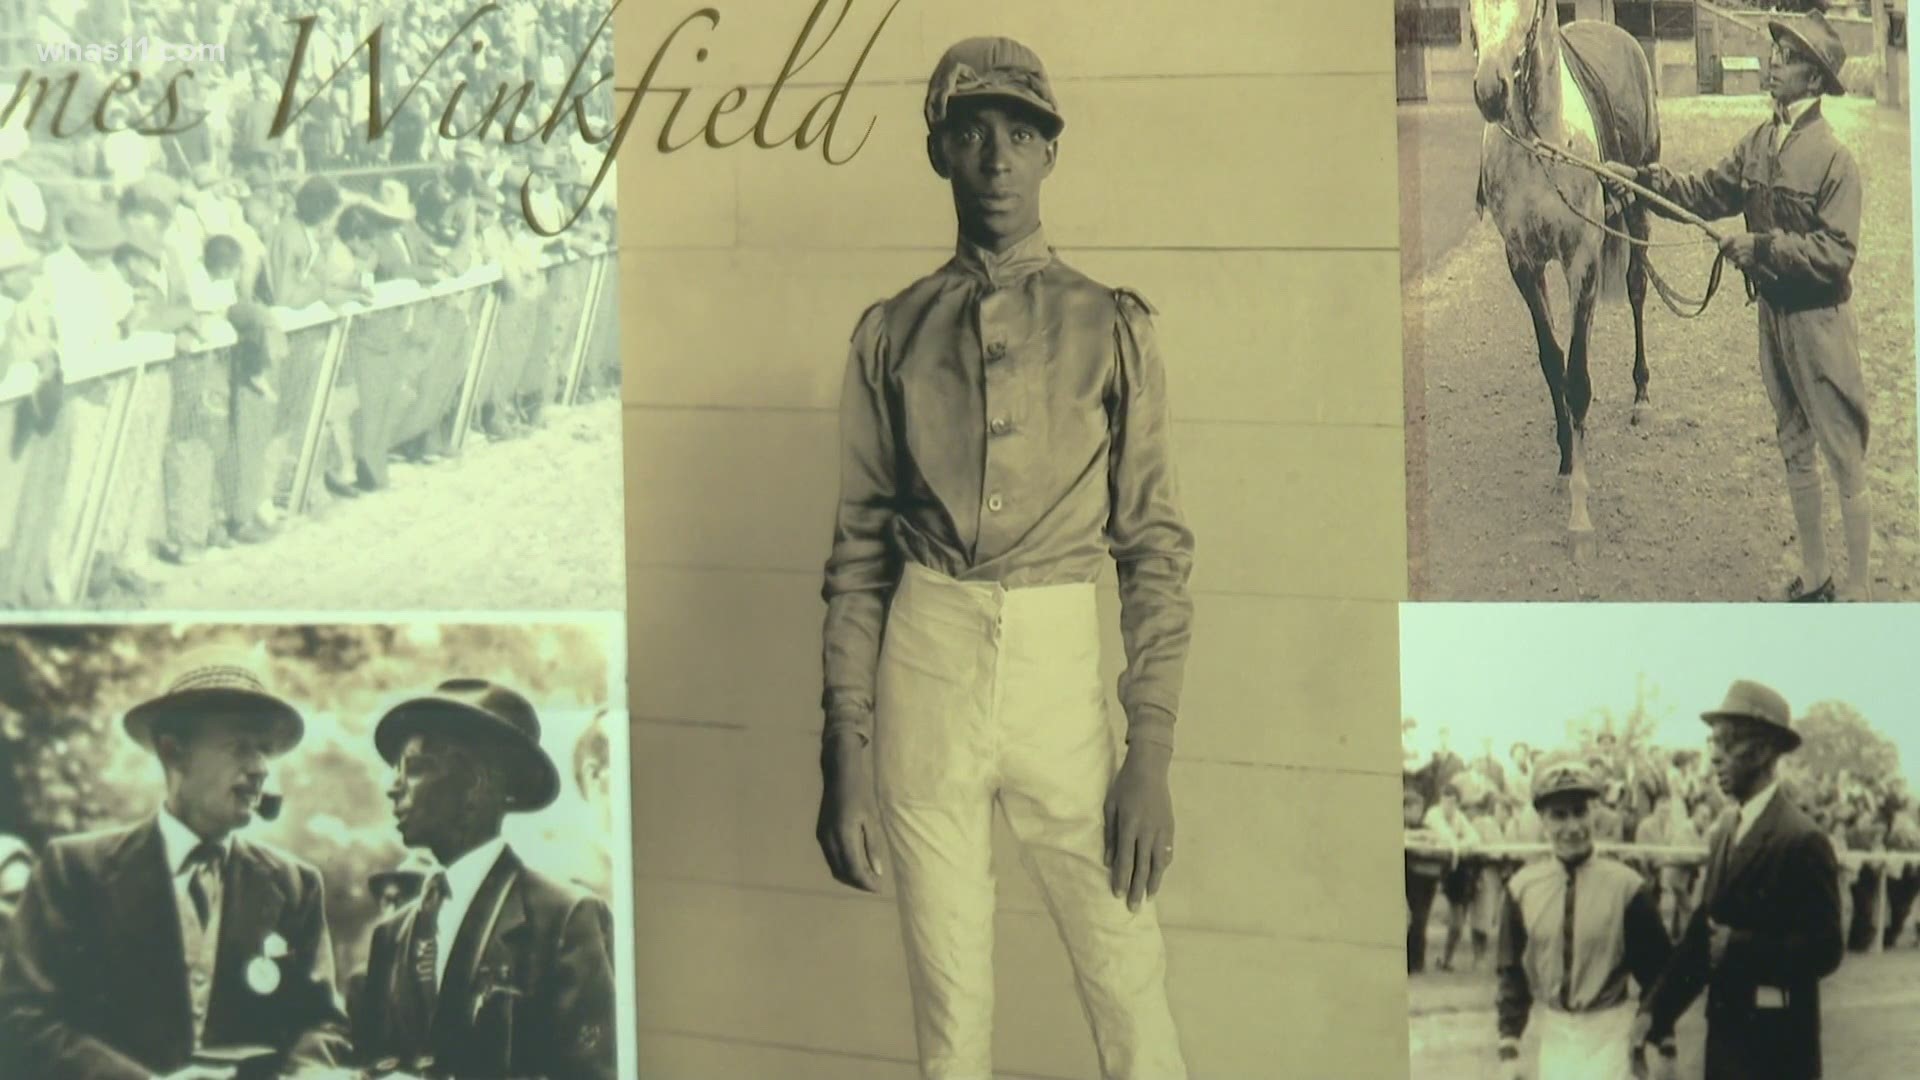 Louisville Restaurant owner dedicates entire eatery to the history of Black jockeys who raced during Kentucky Derby, other races.